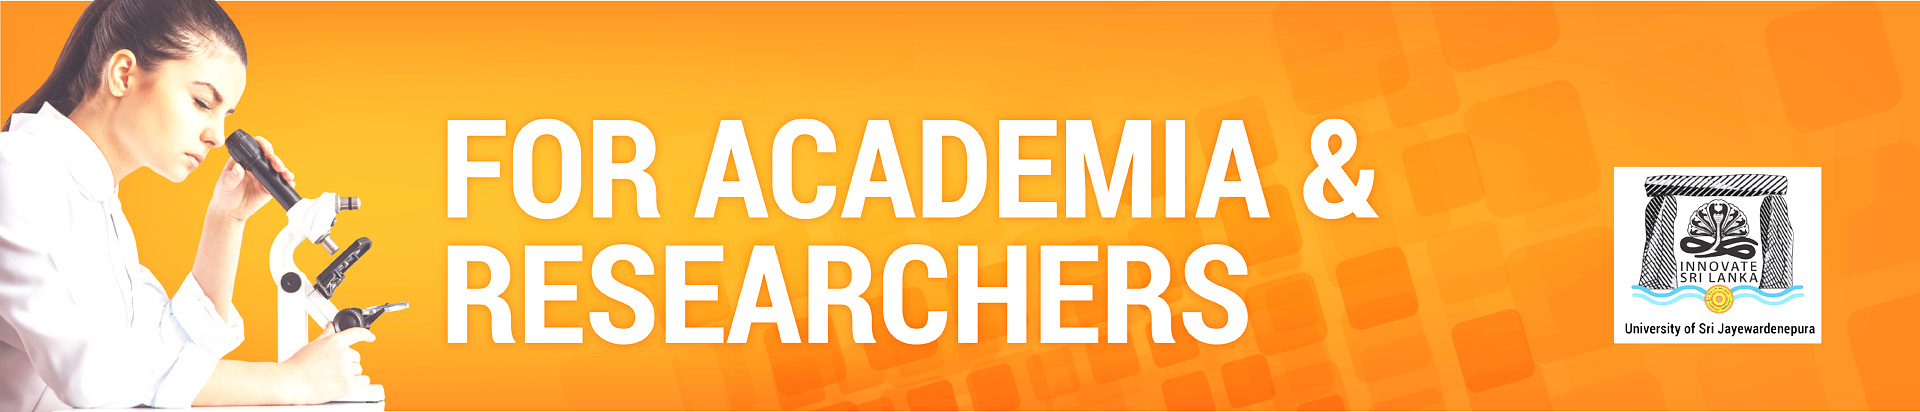 VENTURES FOR ACADEMIA & RESEARCHERS